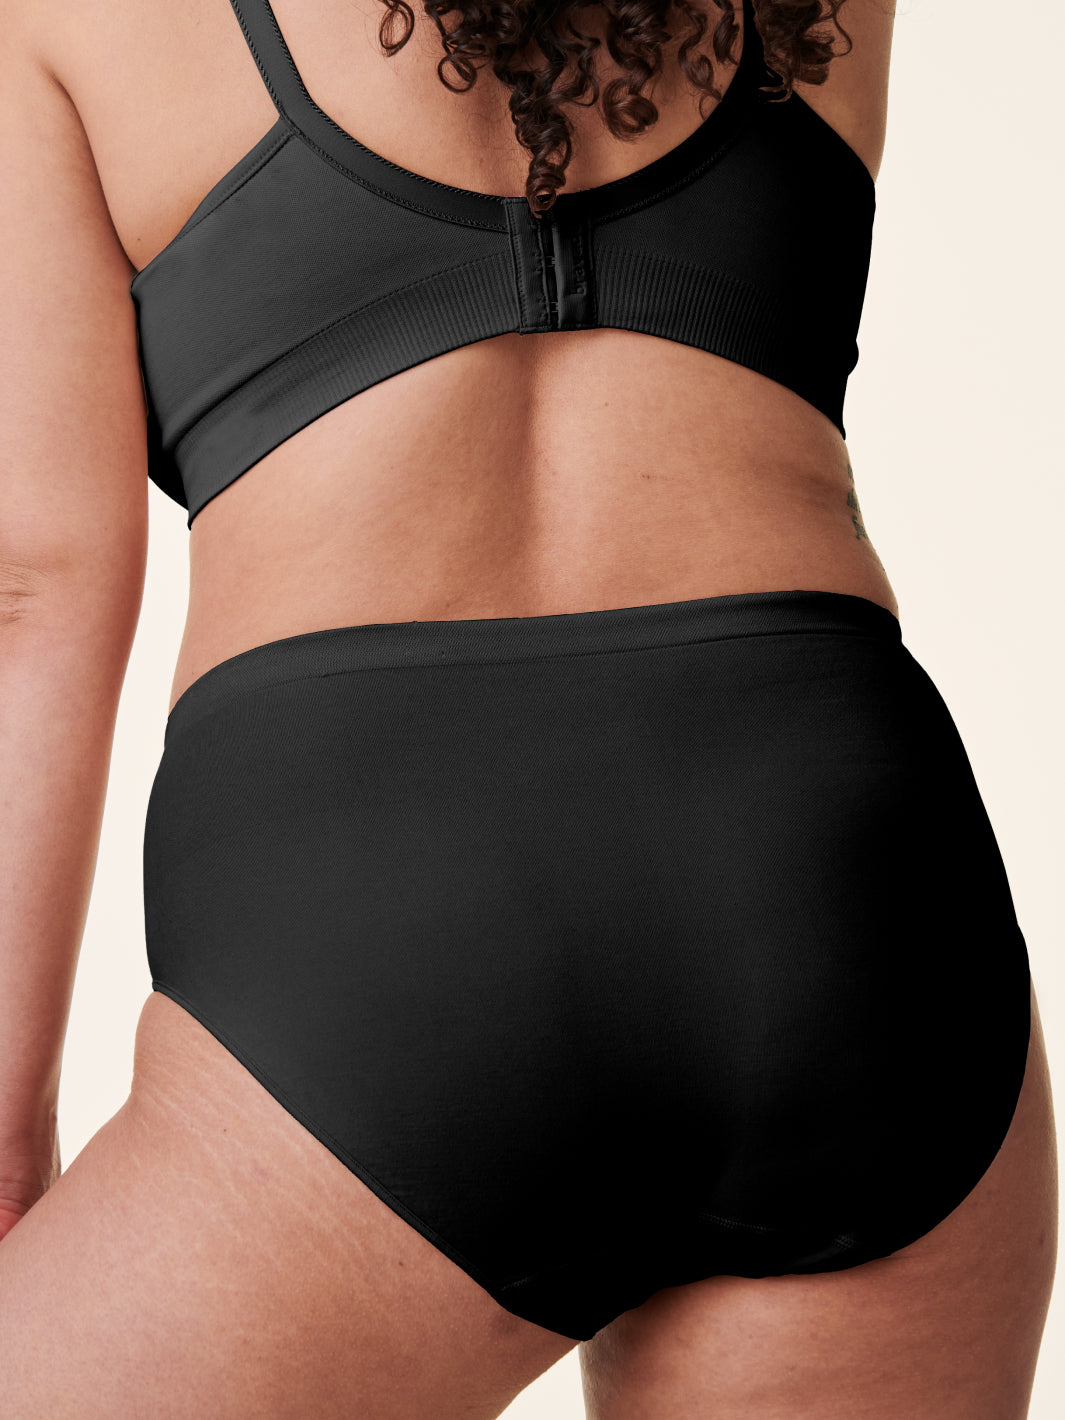 DREAMFIT Underwear for Women Seamless Full Coverage High Rise